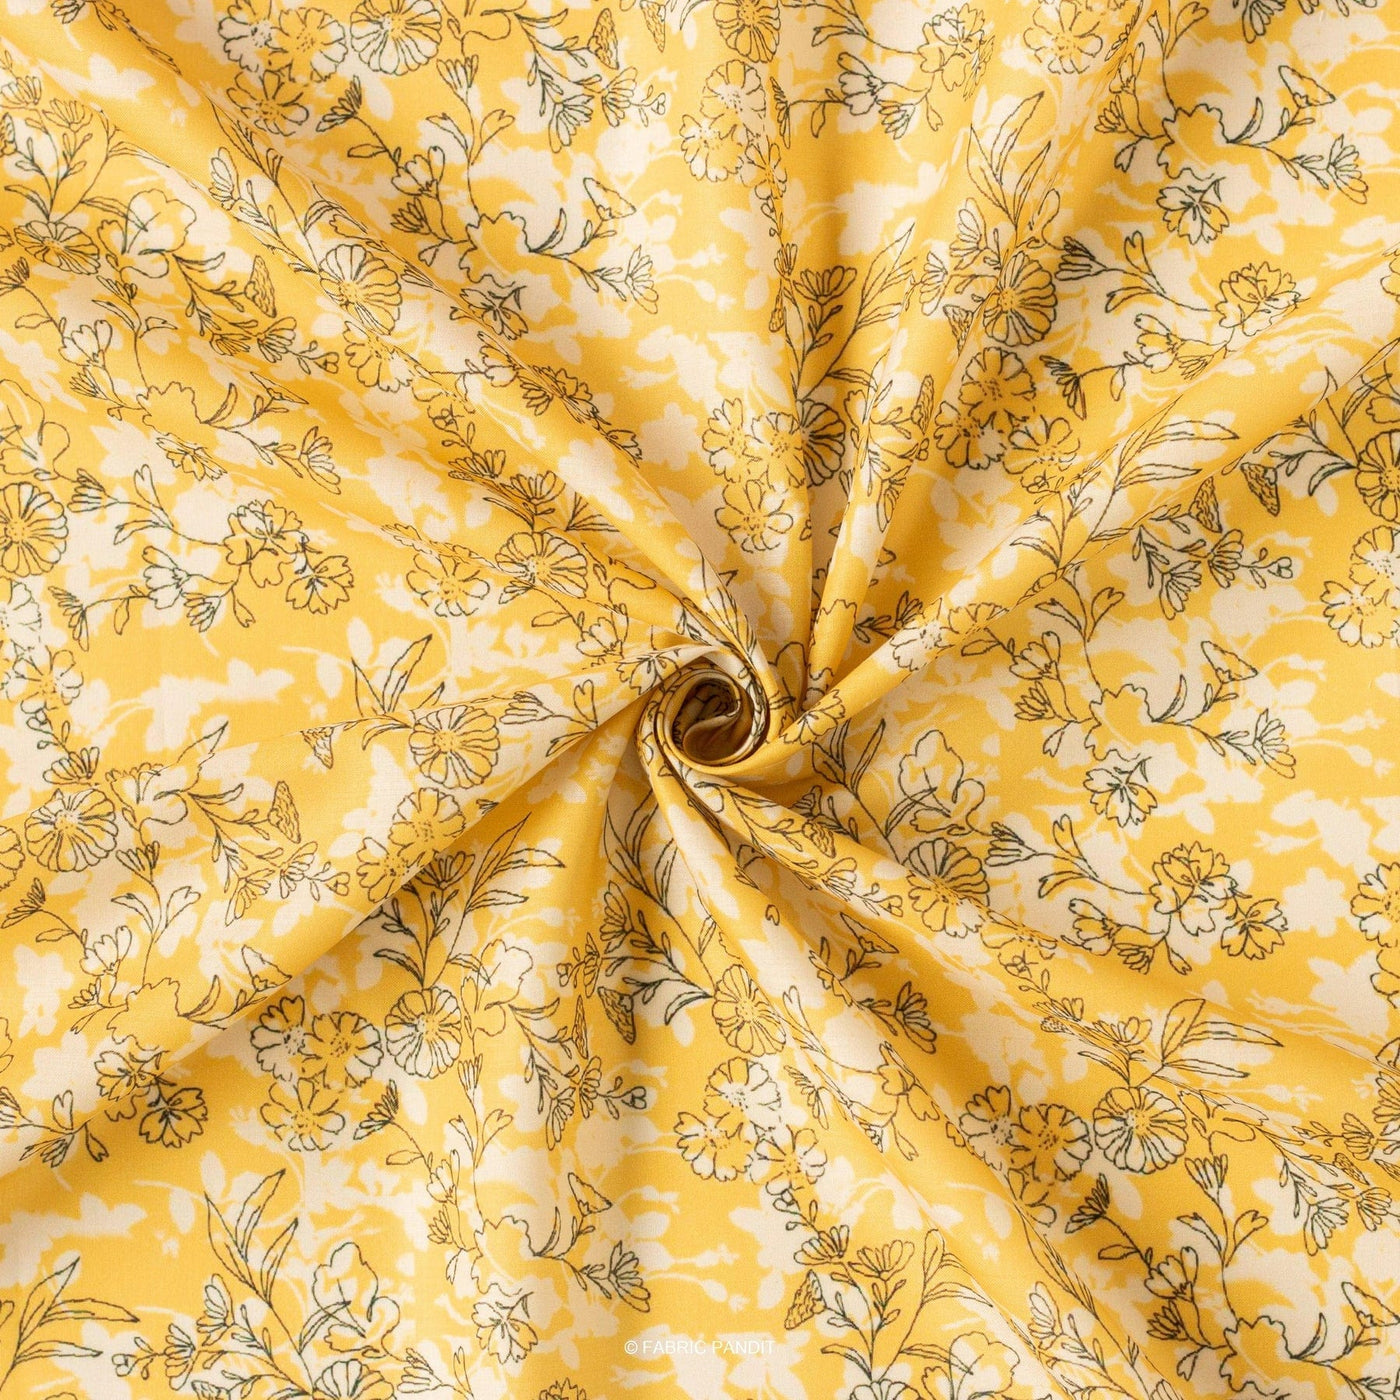 Fabric Pandit Fabric Bright Yellow All Over Floral Vines Digital Printed Cambric Fabric (Width 43 Inches)